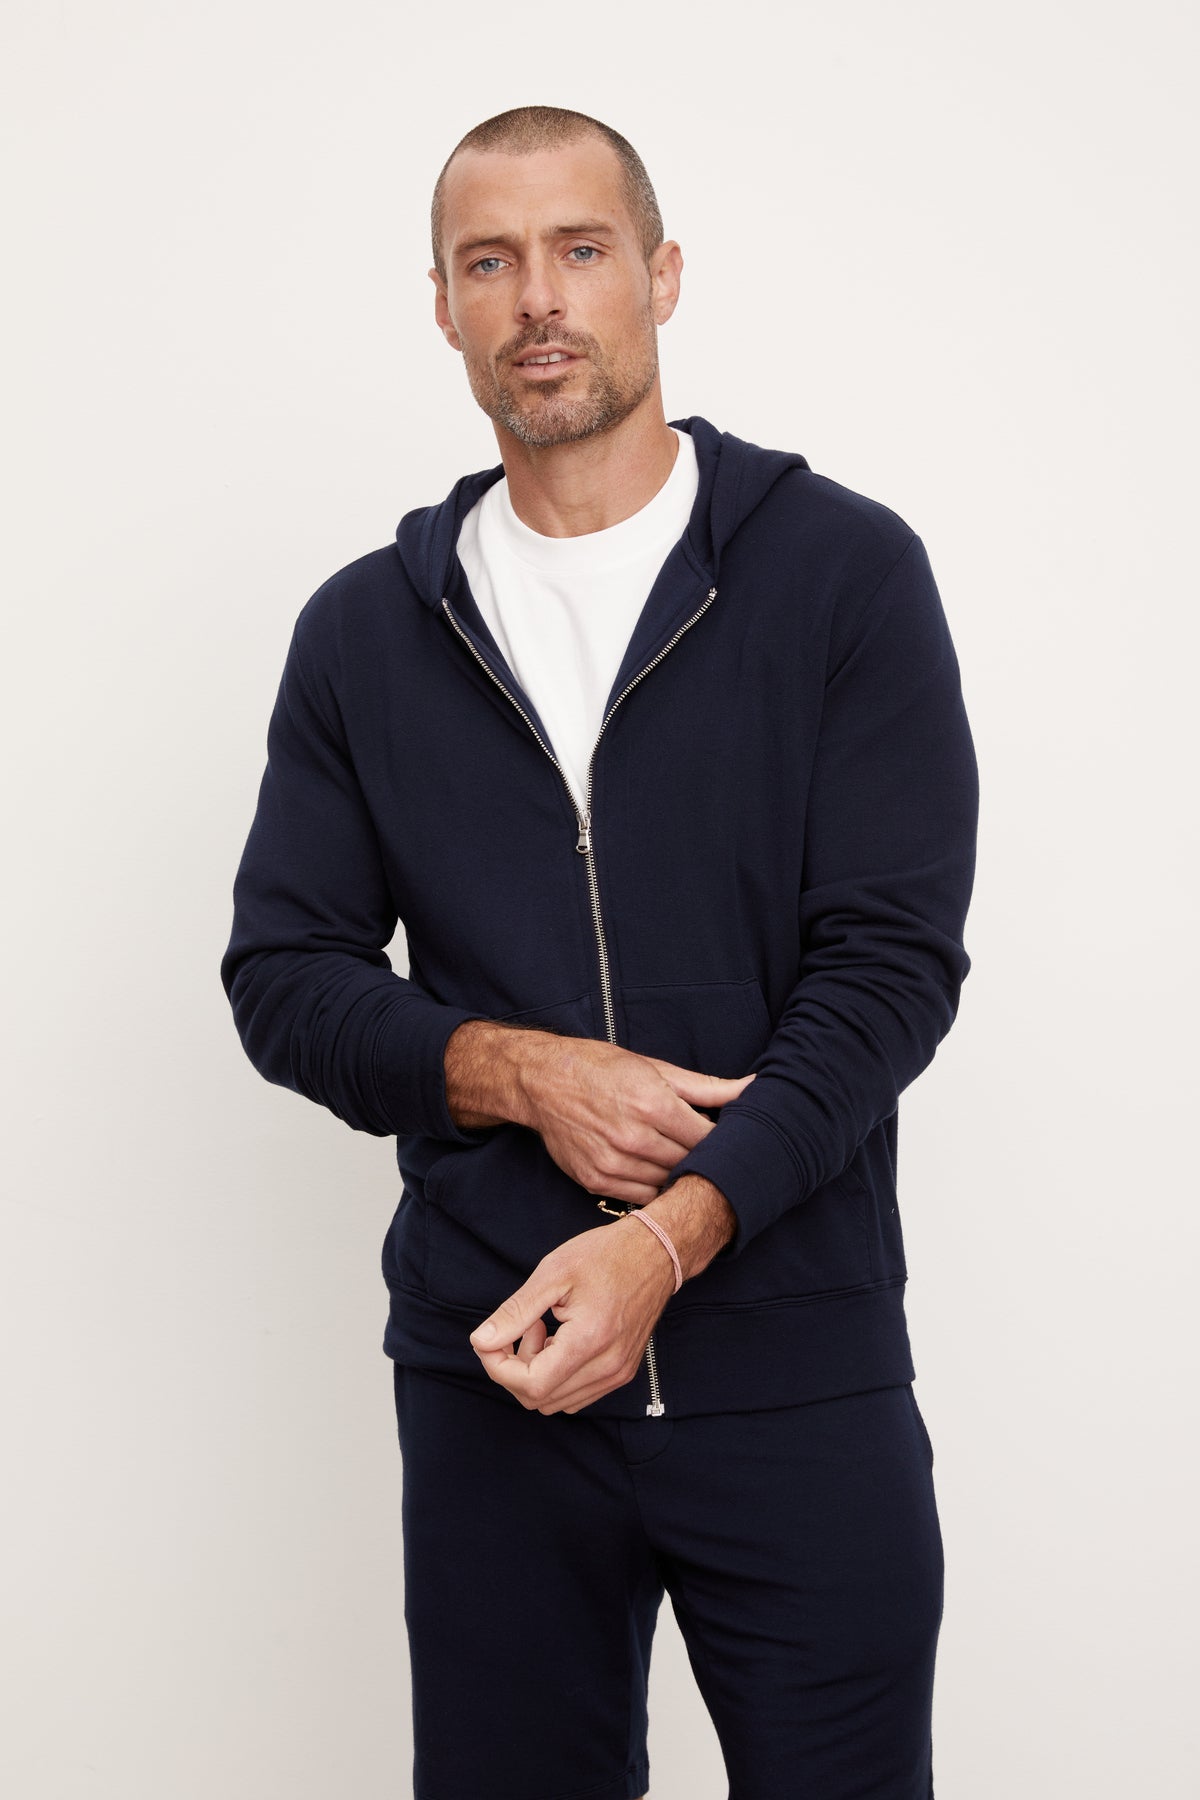 Man standing against a white background wearing a navy blue, medium-weight RODAN LUXE FLEECE ZIP HOODIE hoodie and matching pants, with hands partially in pockets.-36731041415361